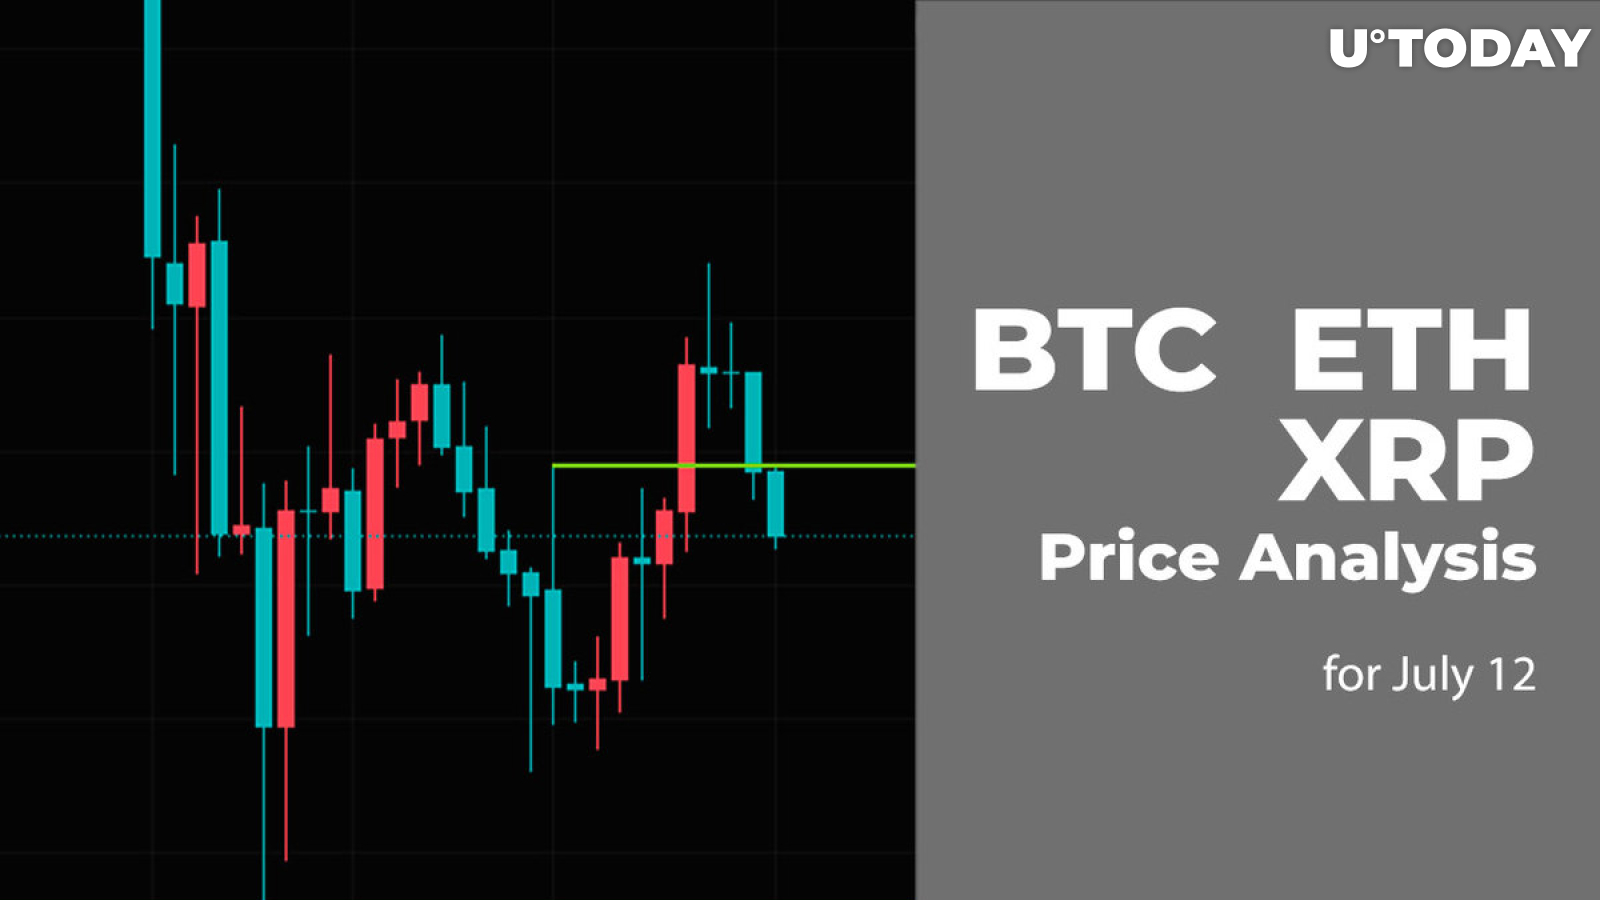 BTC, ETH and XRP Price Analysis for July 12